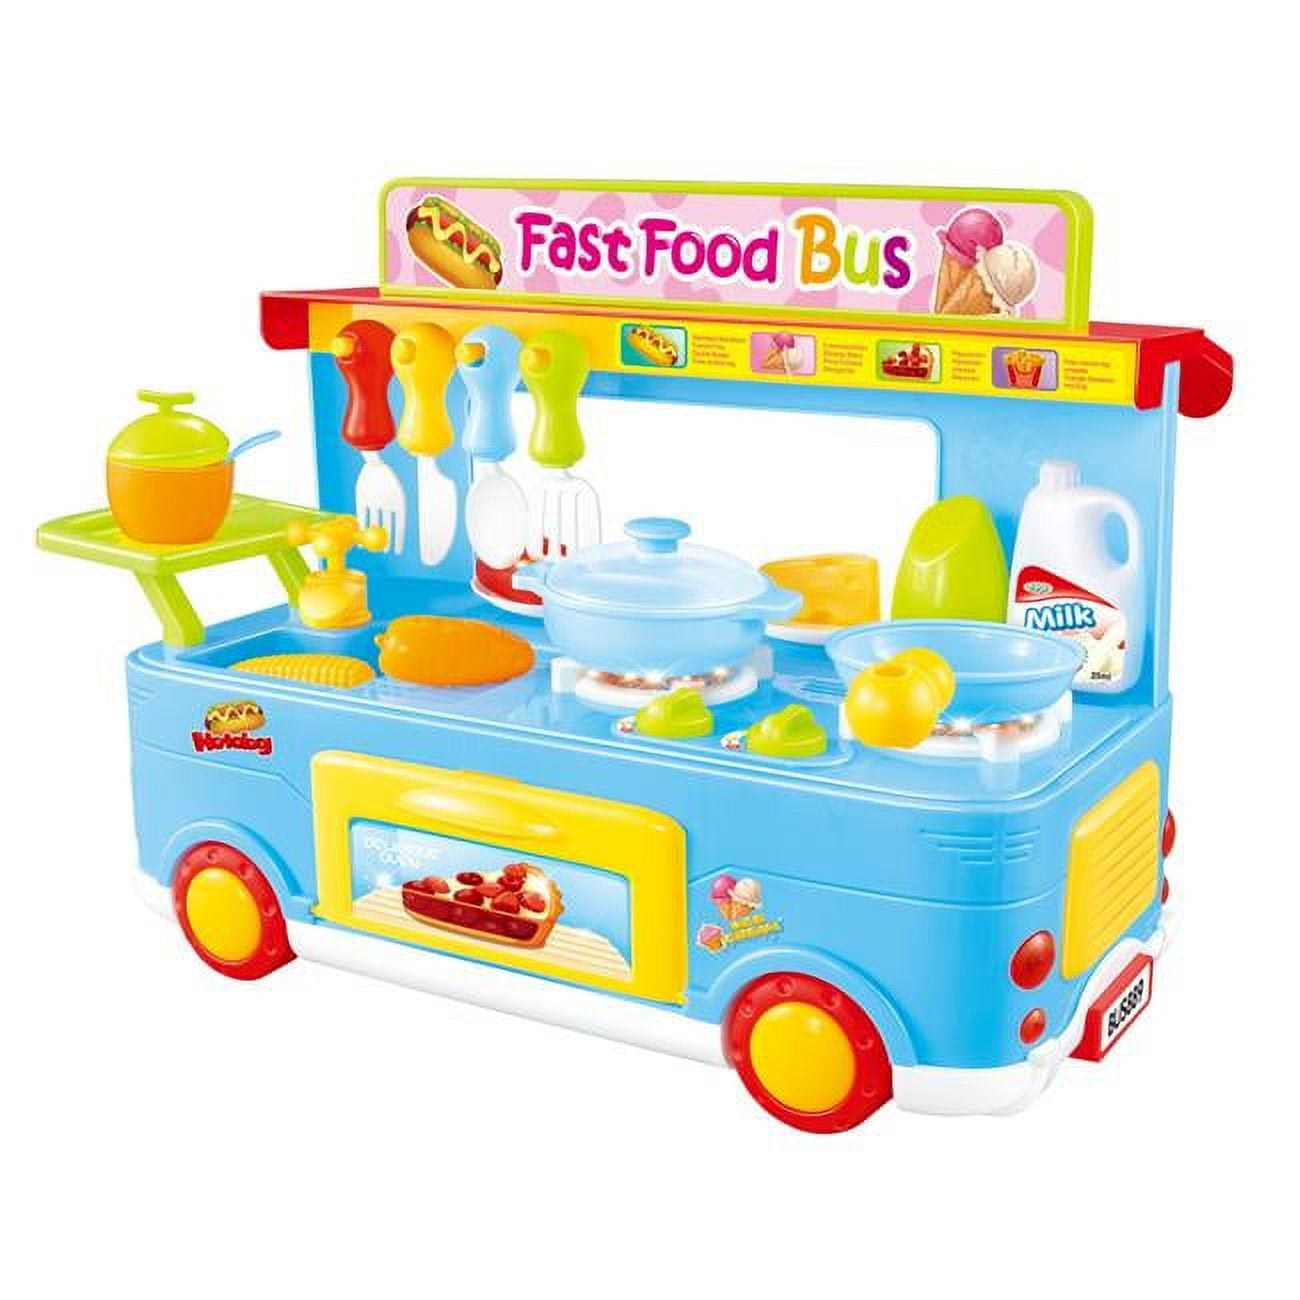 Picture of AZImport PS8807 Fast Food Bus Kitchen Play Set Toy, Blue - 29 Piece